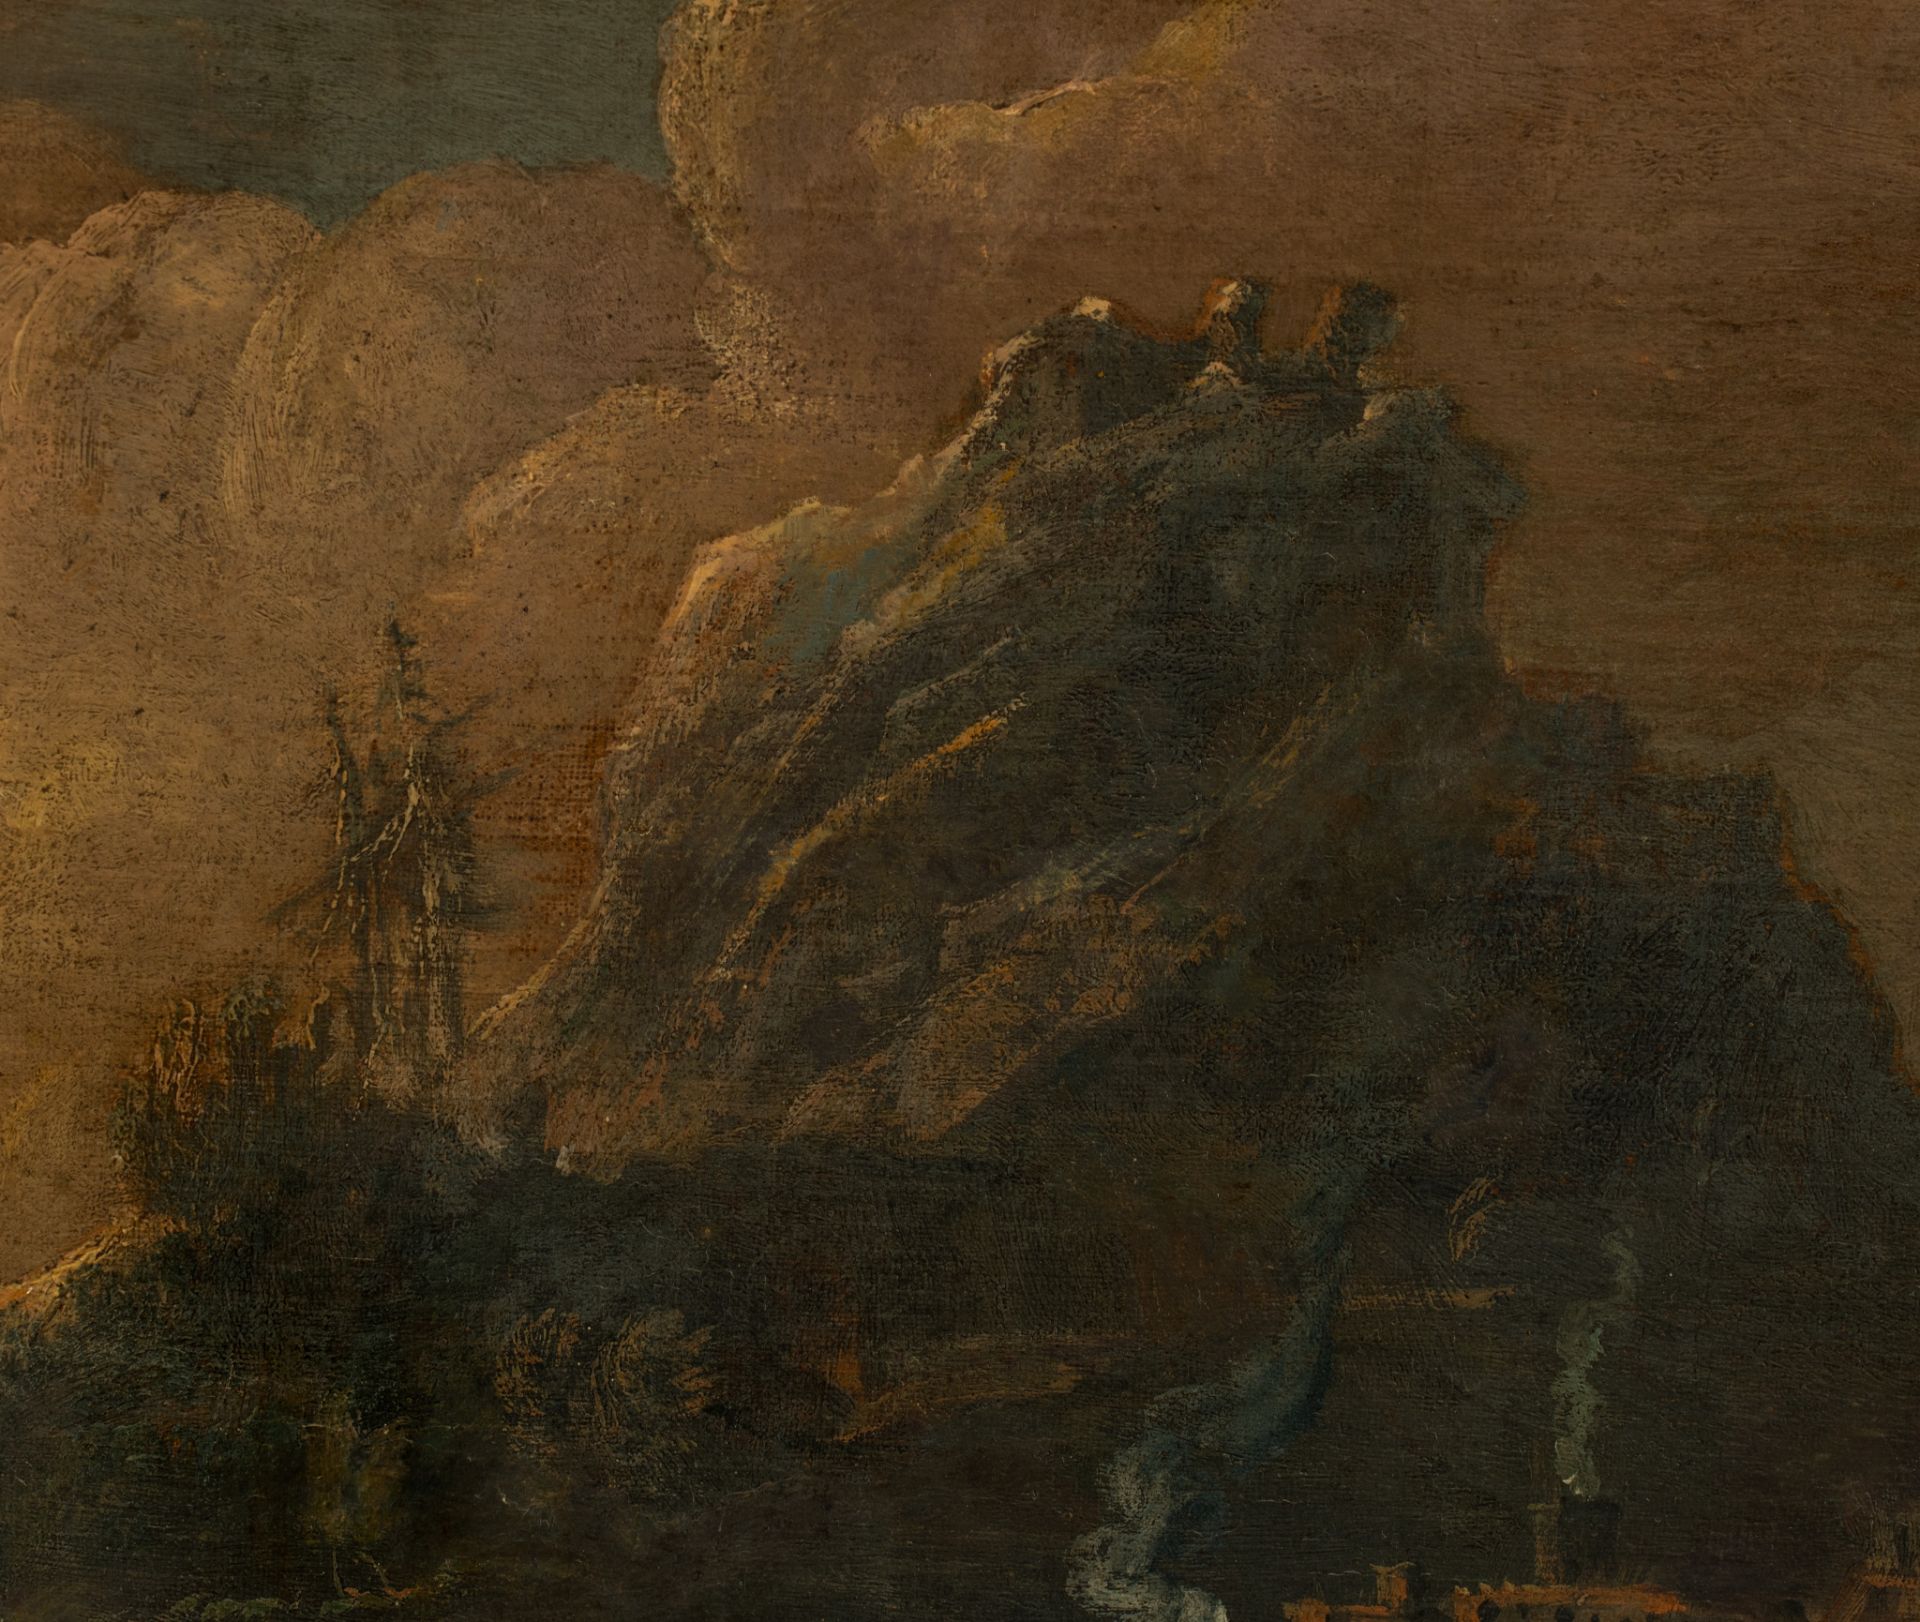 Attributed to Salvator Rosa (1615-1673), the golddiggers, oil on canvas, 120 x 140 cm - Bild 8 aus 8